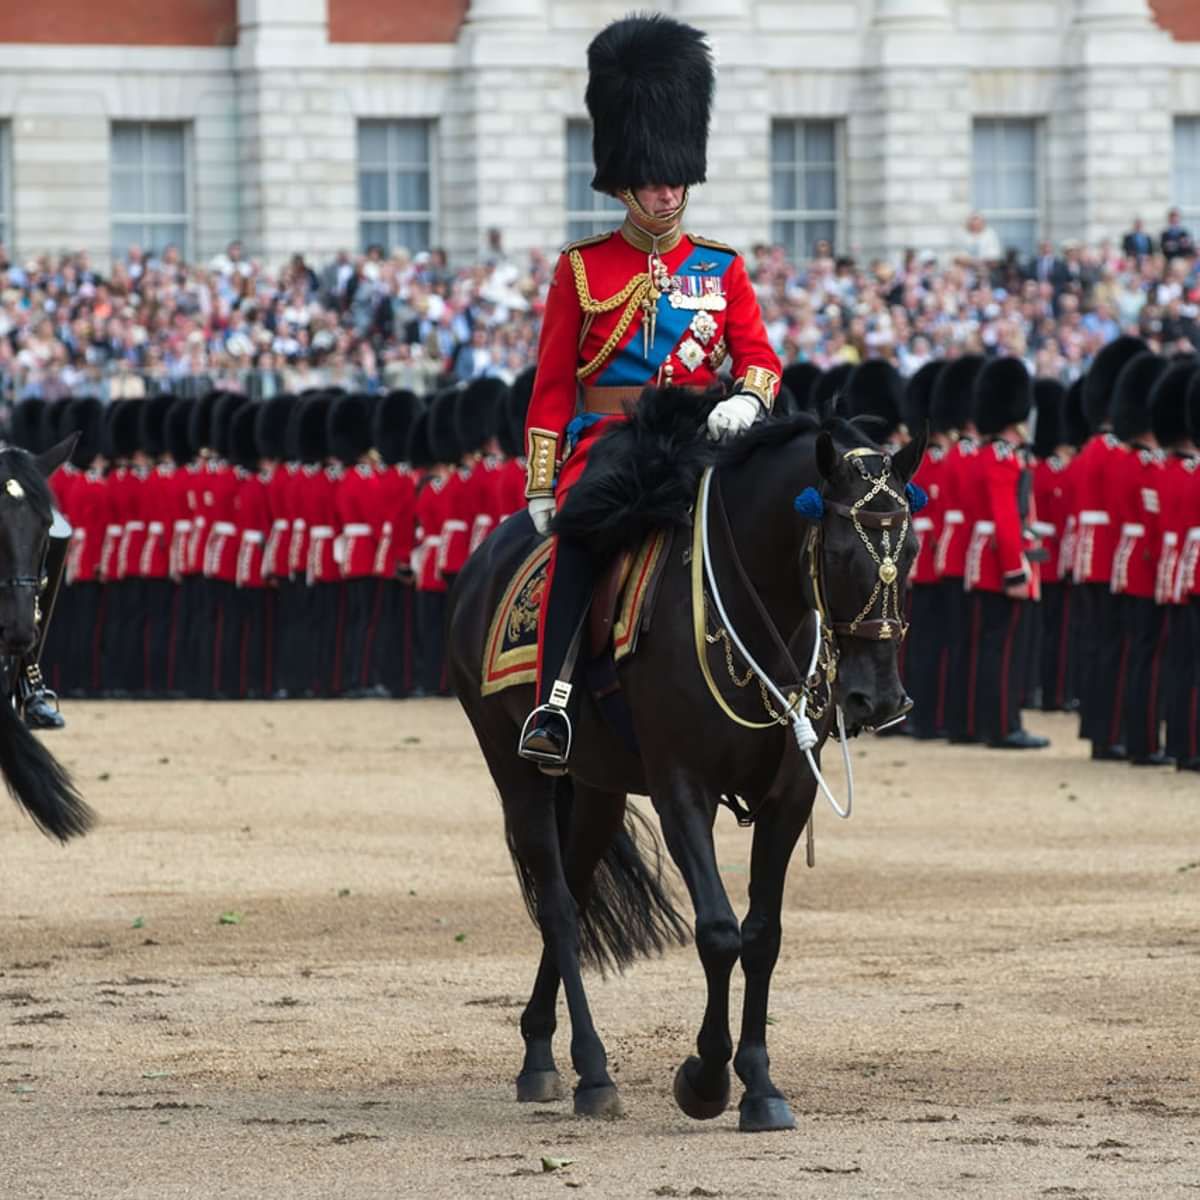 Trooping the Colour 'The Colonel's Review' by HRH the Prince of Wales